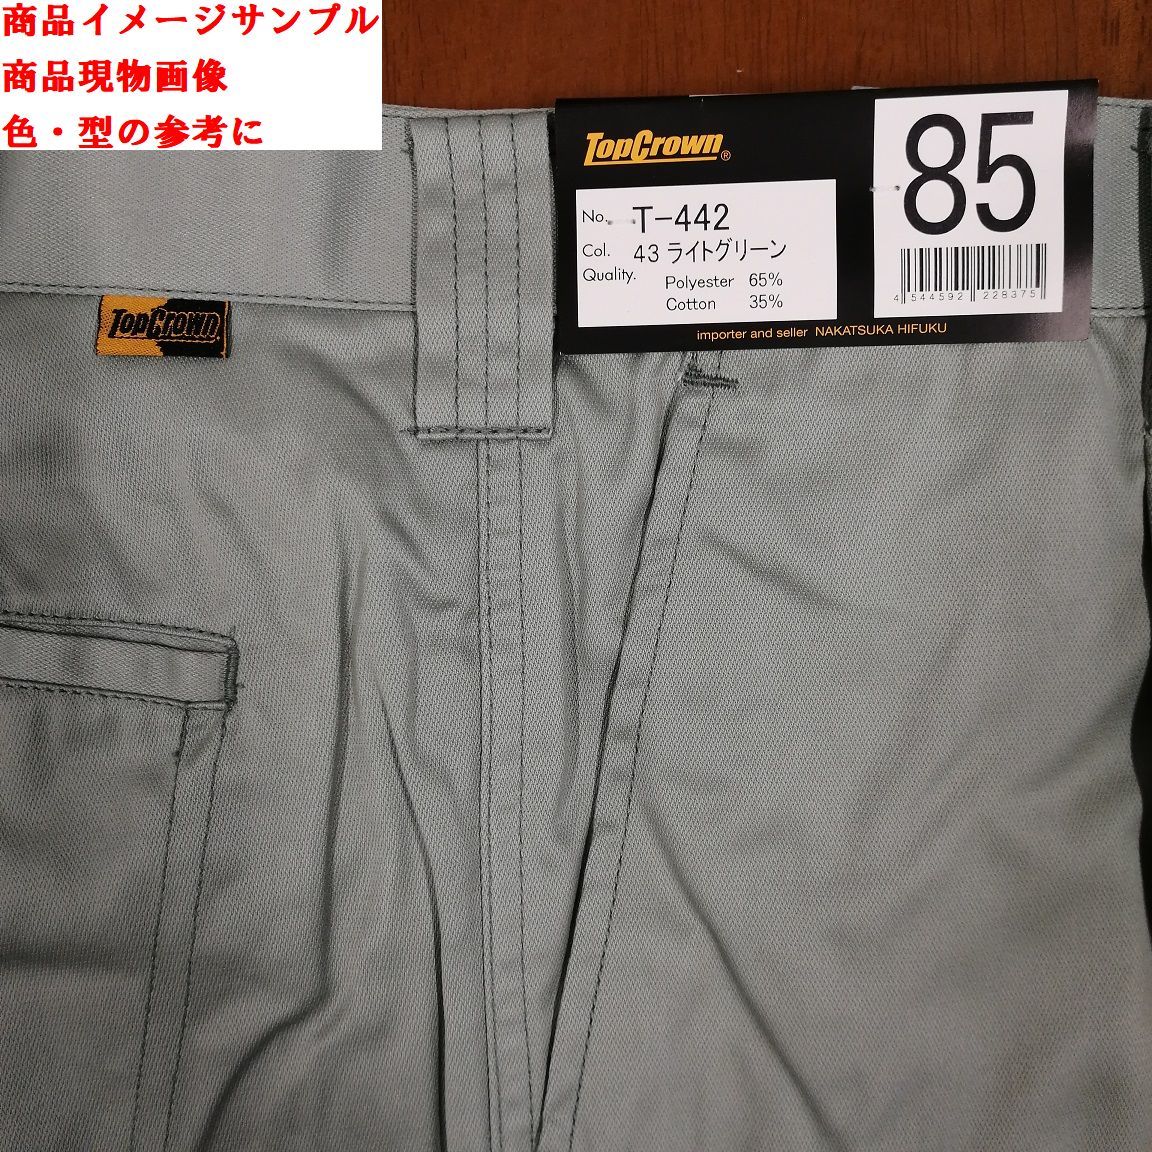 4-12/1 3 sheets set W101 C(43 light green T-442nakatsuka. clothes TOPCROWN top Crown cargo pants working clothes electro static charge prevention 